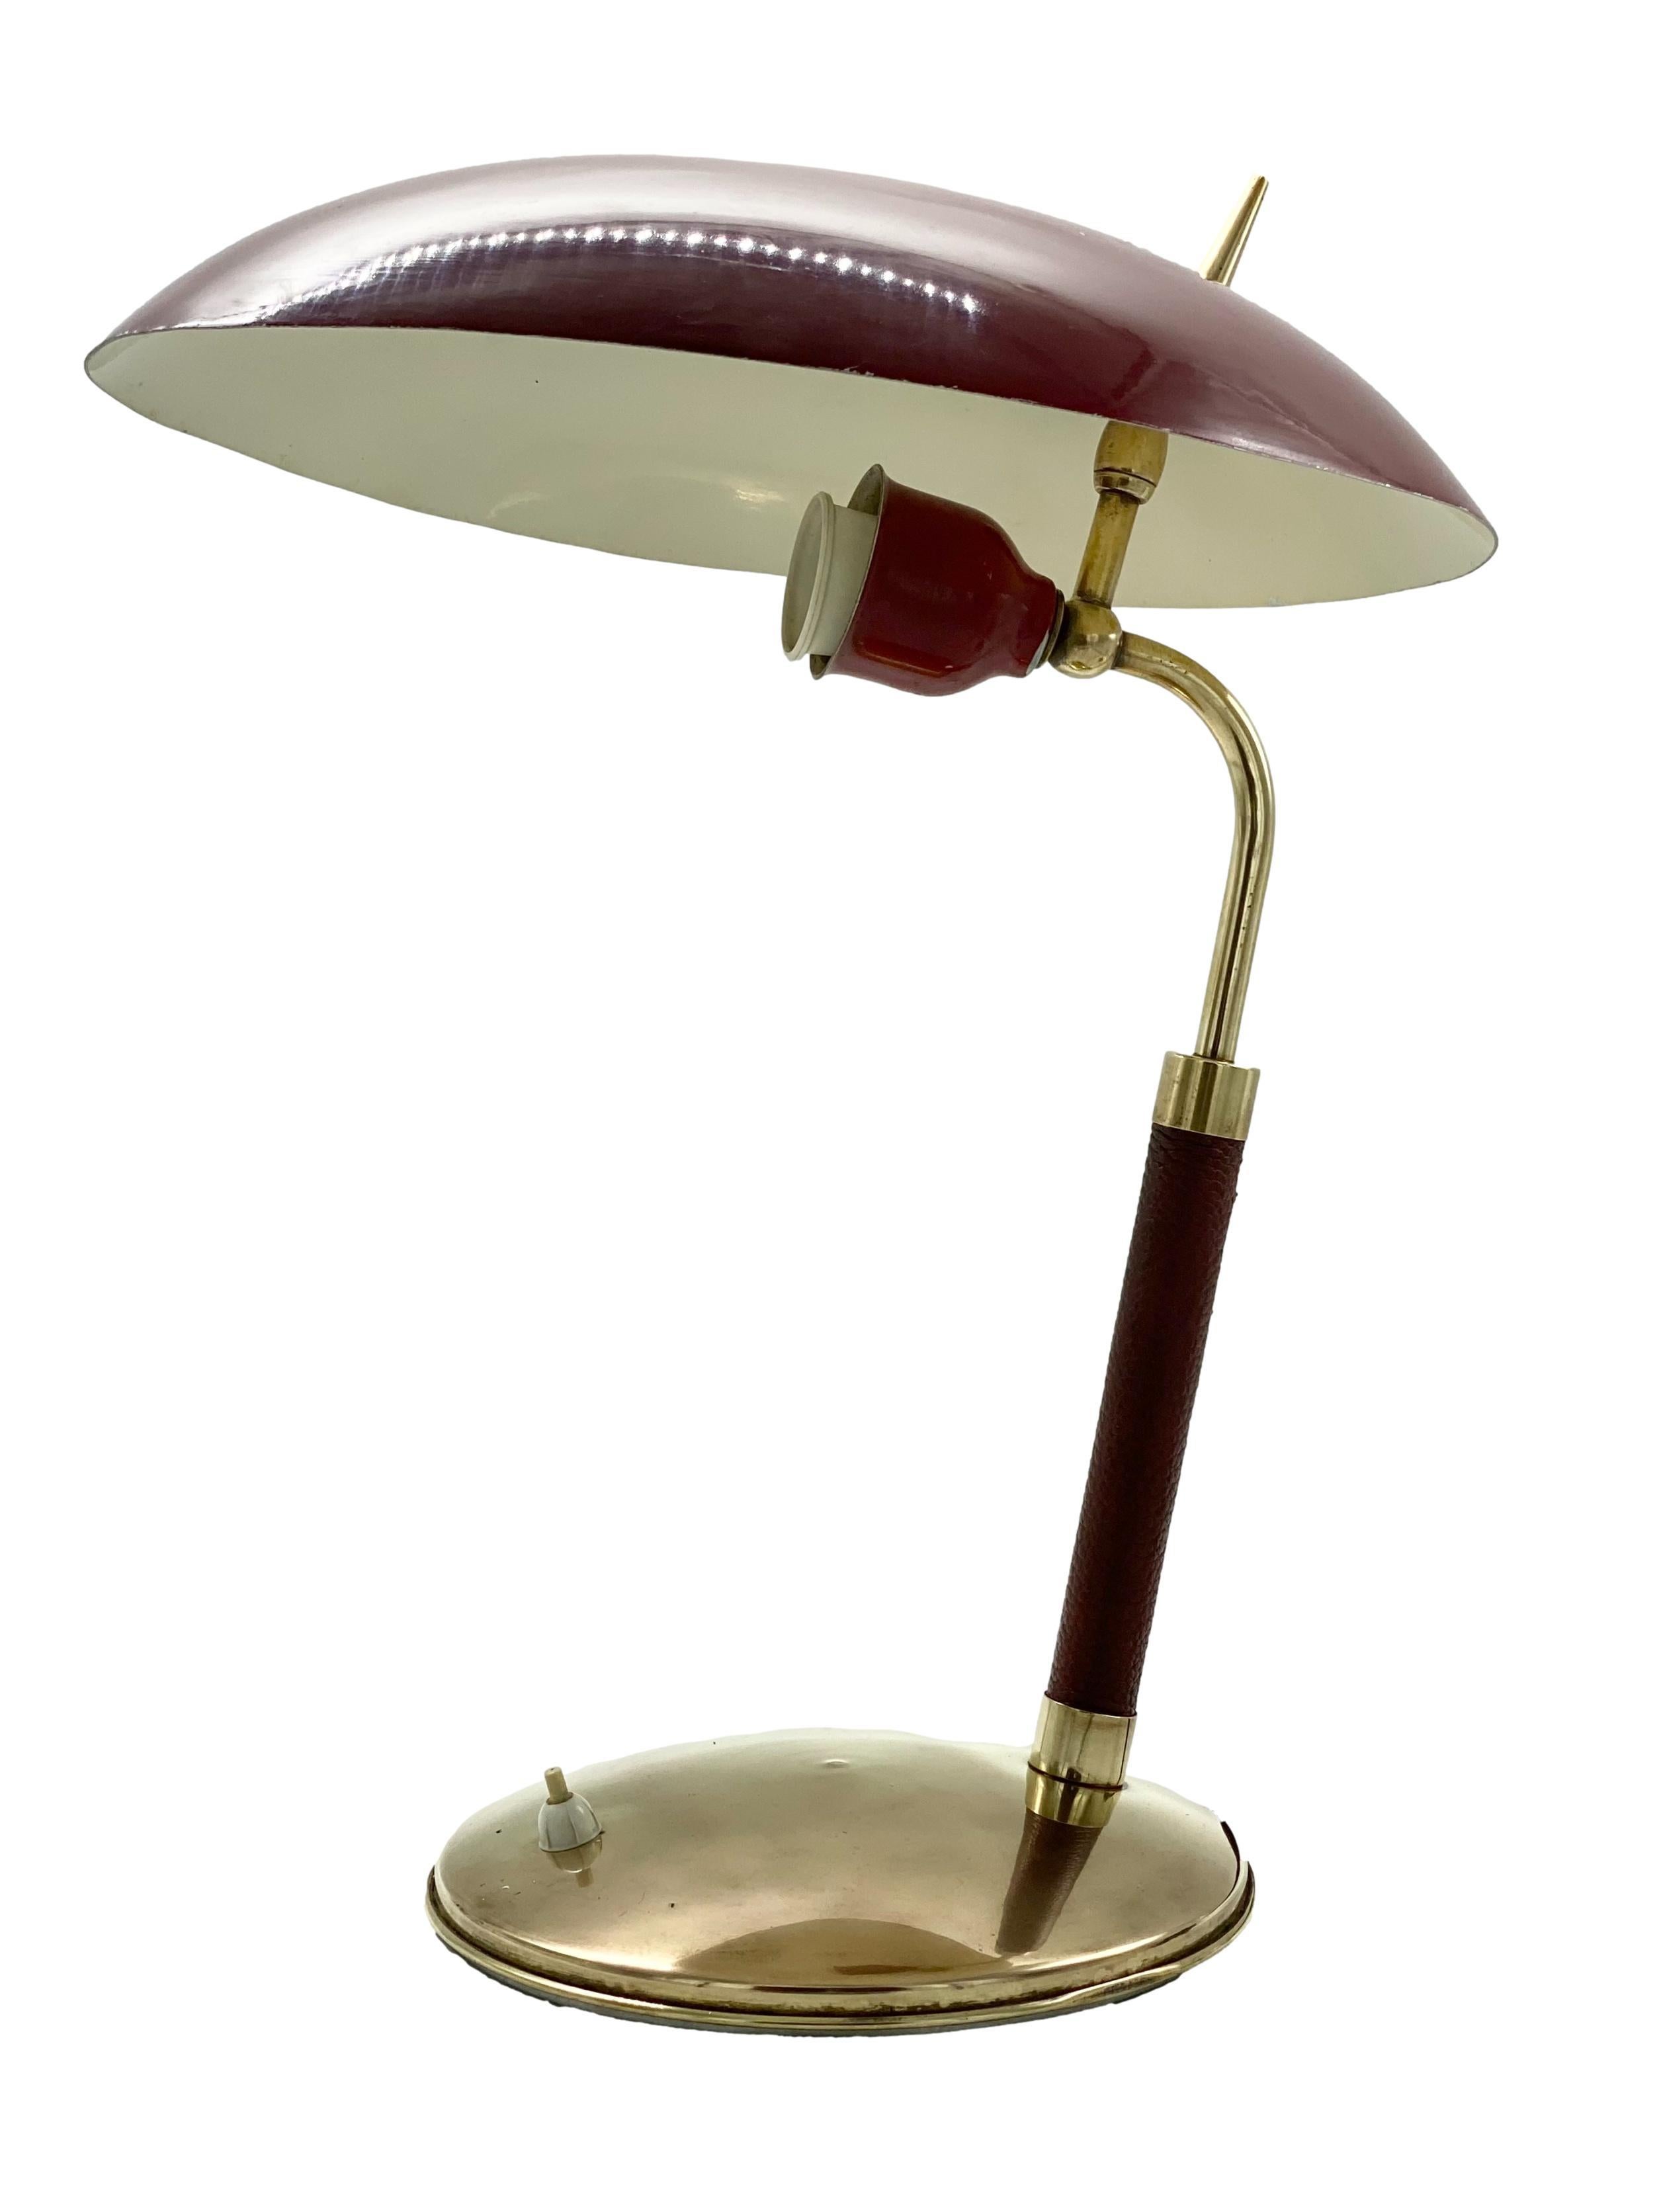 Table lamp, red metal, brass and leather, Lumen Italia, 1950s. 
This colourful desk lamp is of balanced, organic design and elegant appearance. 
On the round brass base there is a switch. The lamp shows an overall patina which contributes to the